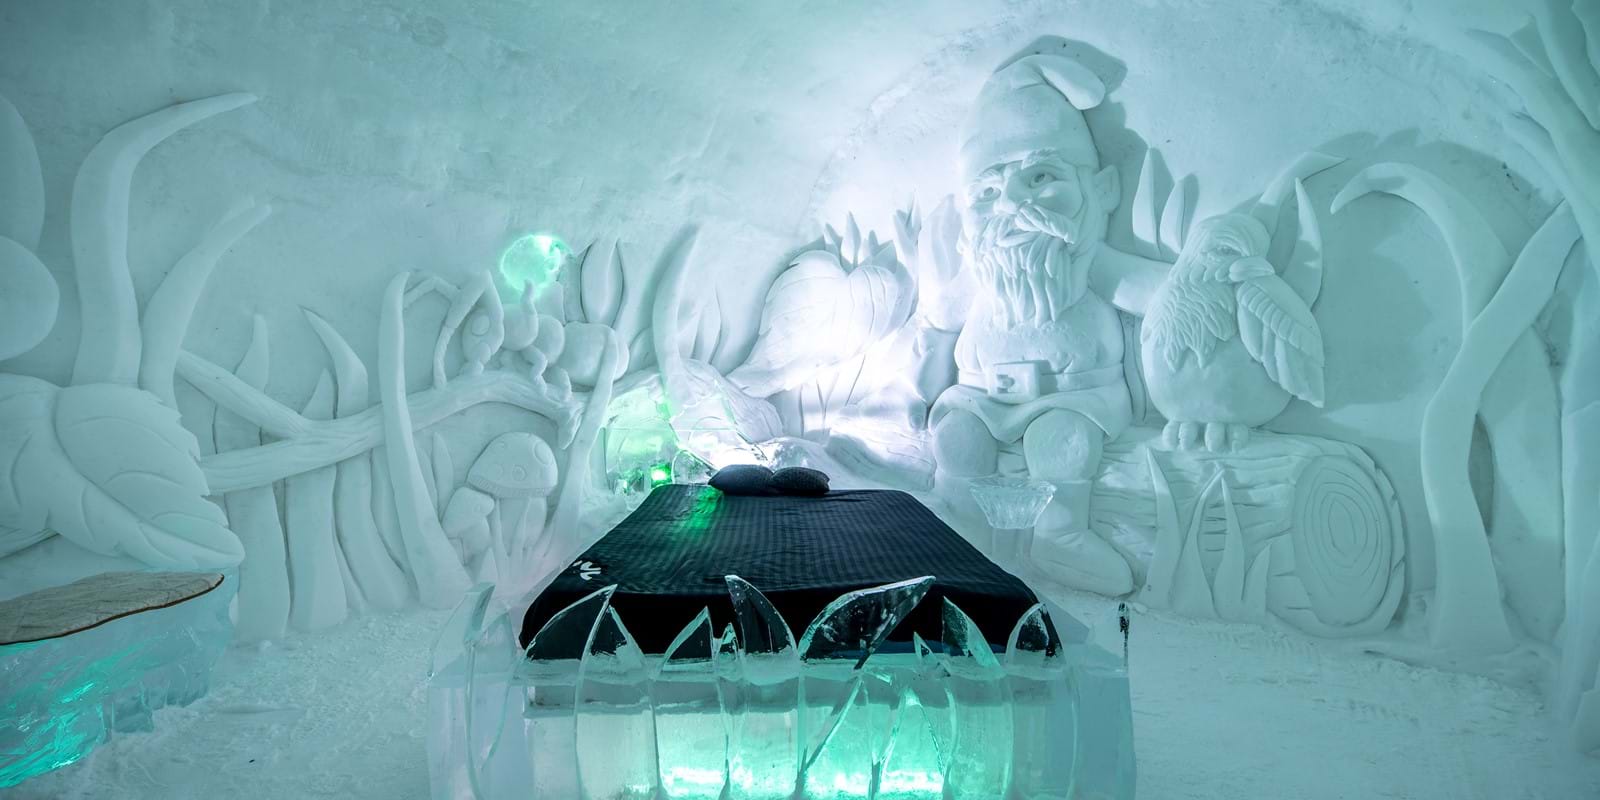 Hotel de Glace - The Ice Hotel located in Qeubec